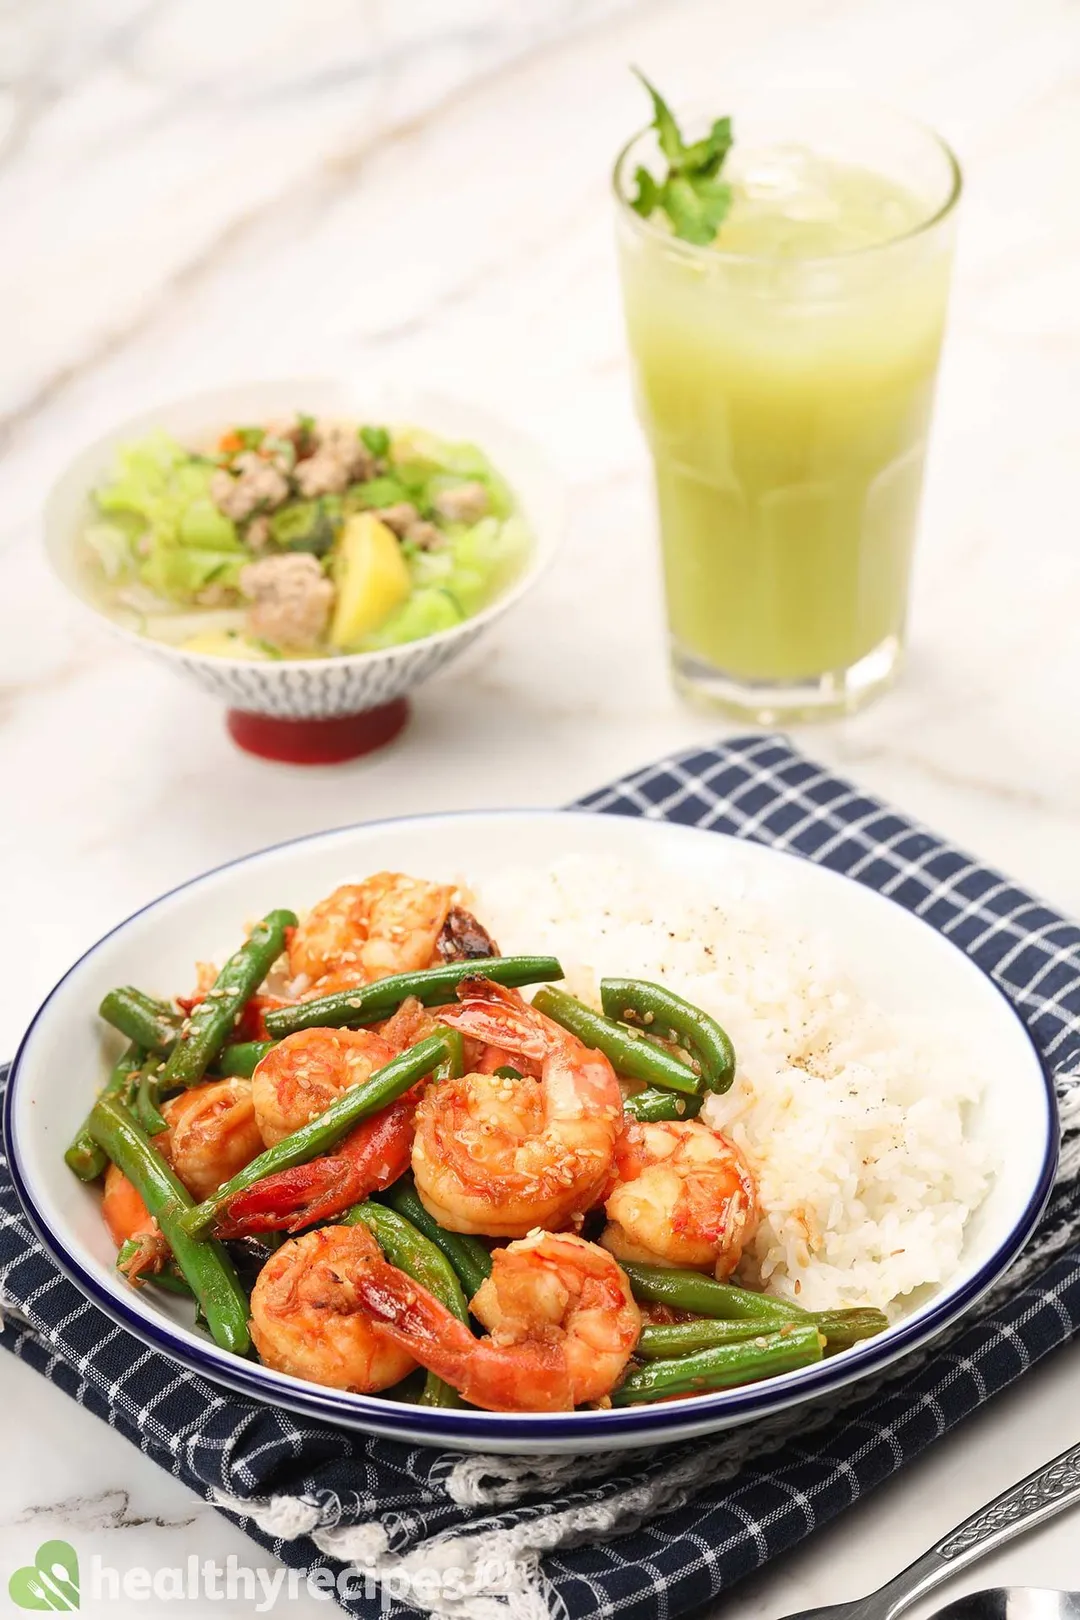 A white dish filled with rice, shrimp, and green beans put on a blue checkered tablecloth, with a bowl of soup and a glass of green juice in the background